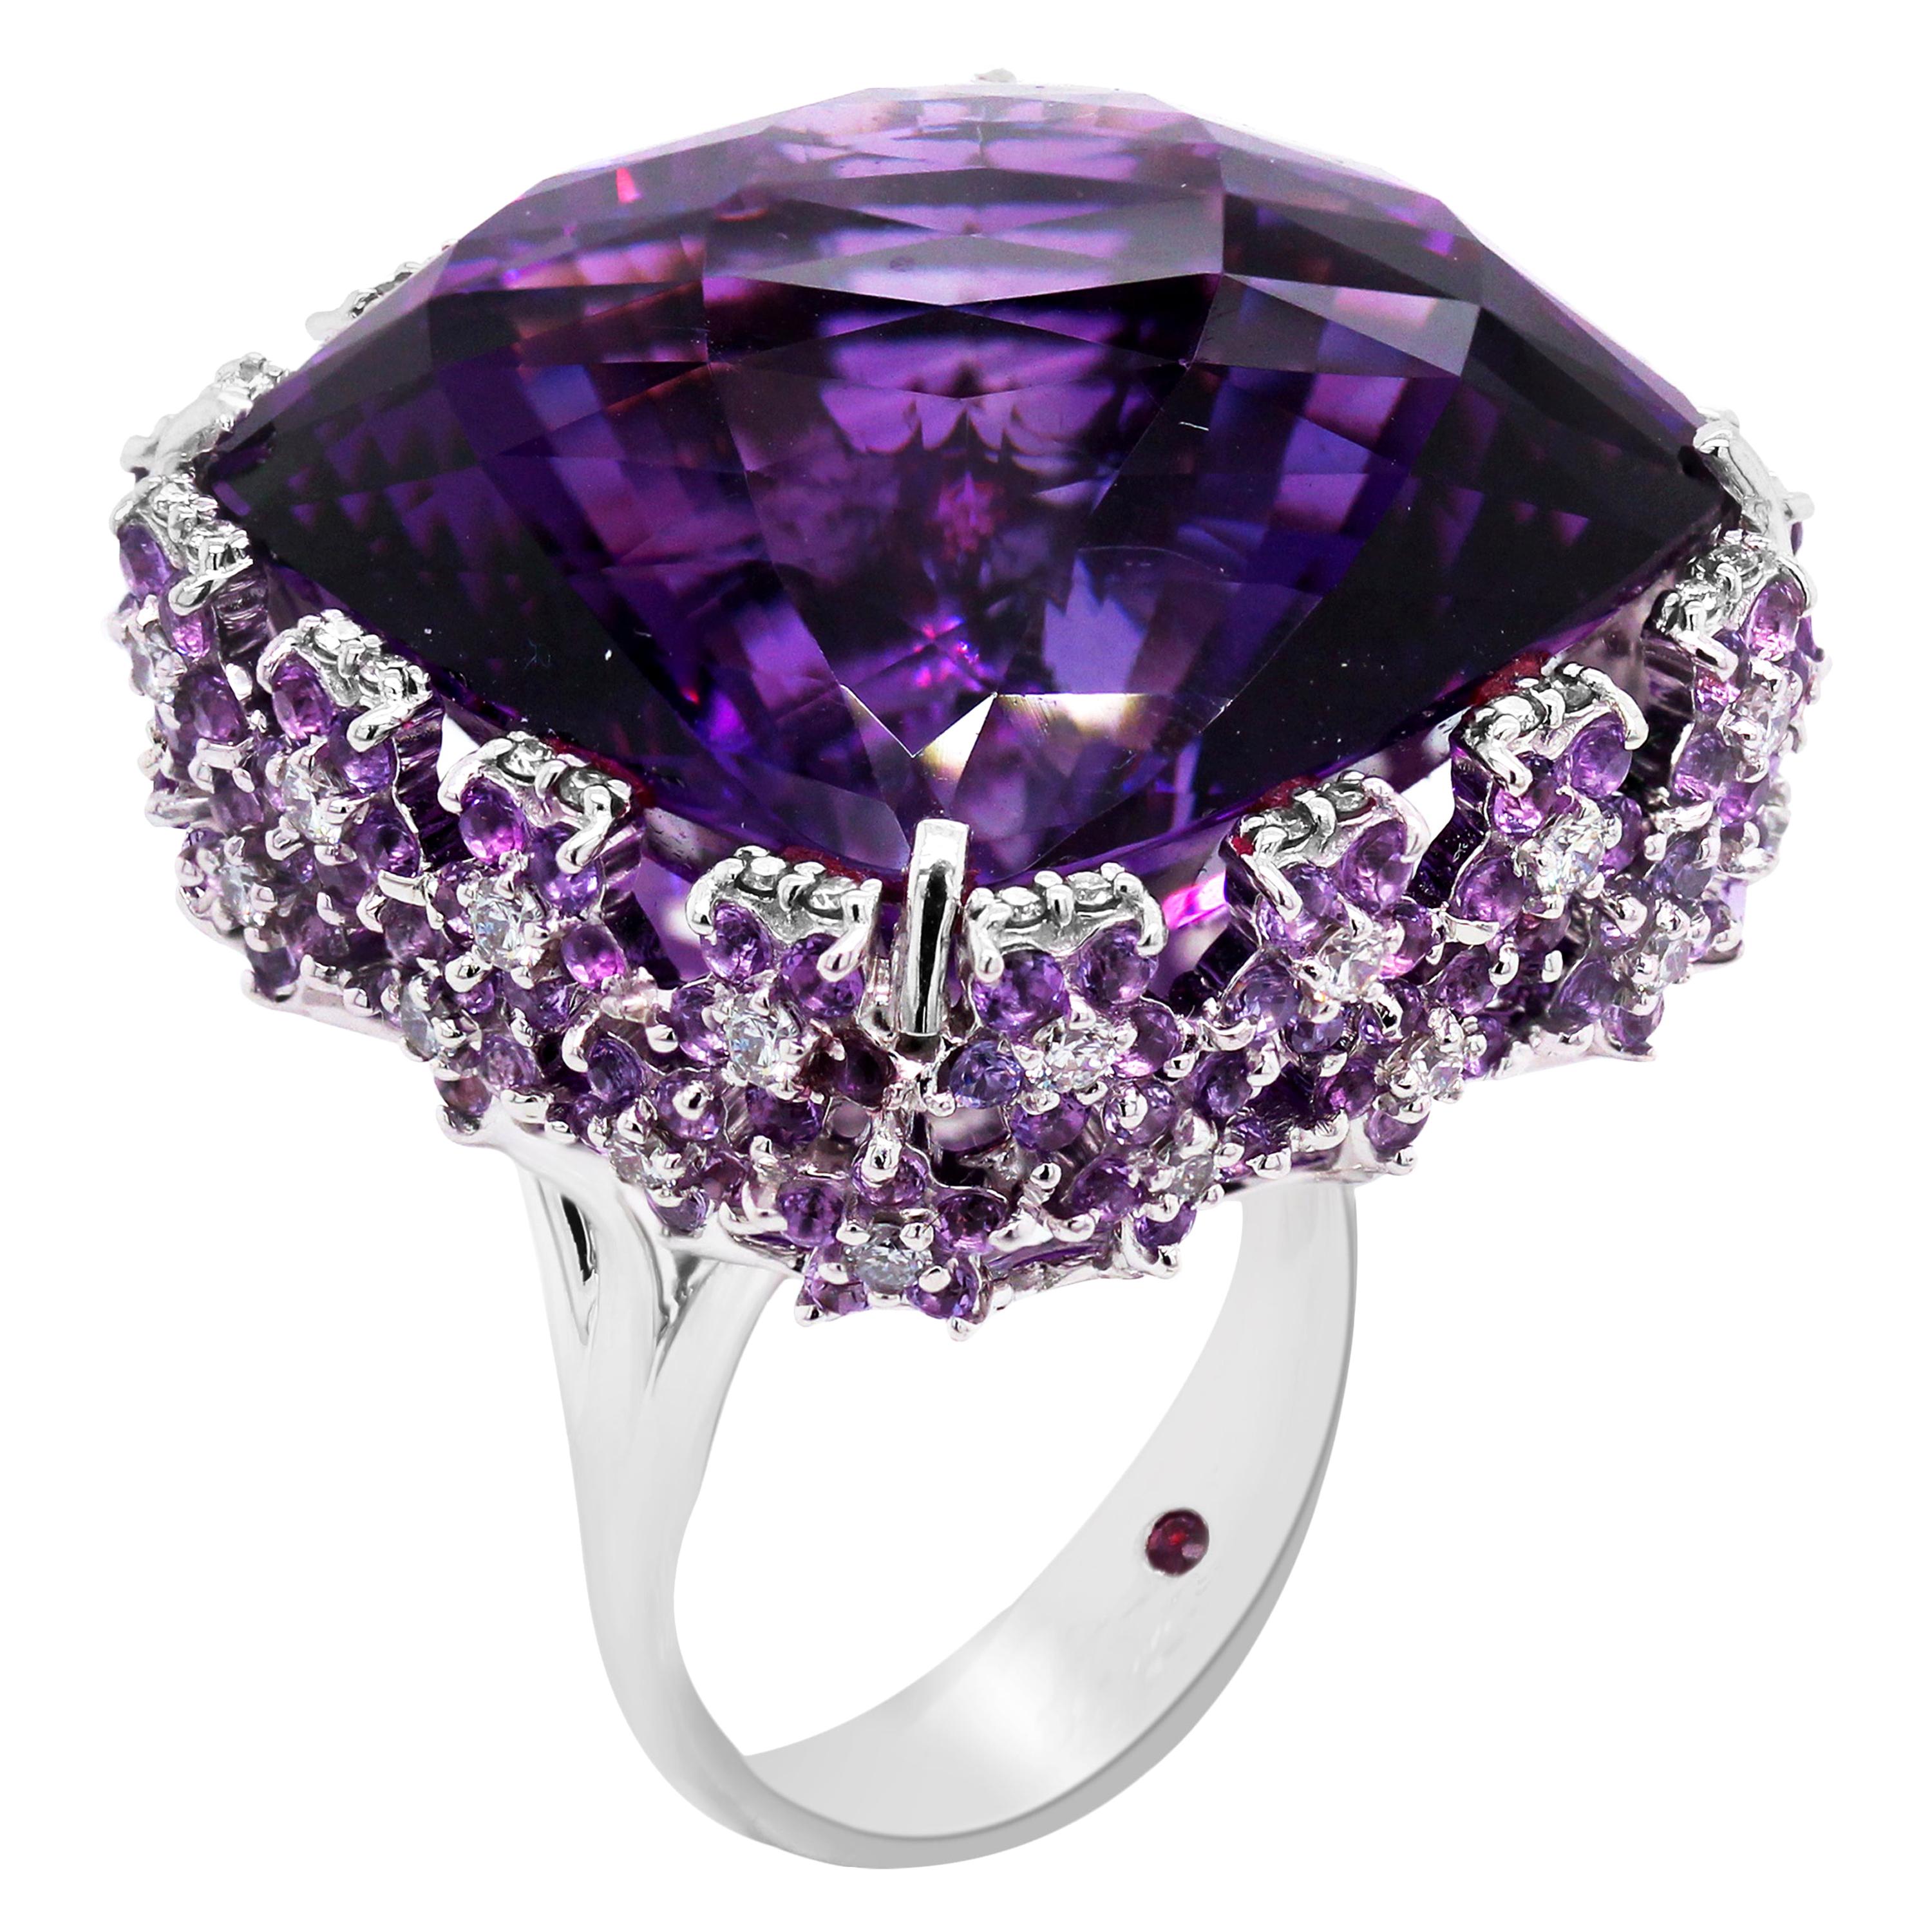 Roberto Coin 73.44 Carat Amethyst White Gold Diamond Large Cocktail Ring  For Sale at 1stDibs | roberto coin diamonds by the inch, amethyst coin